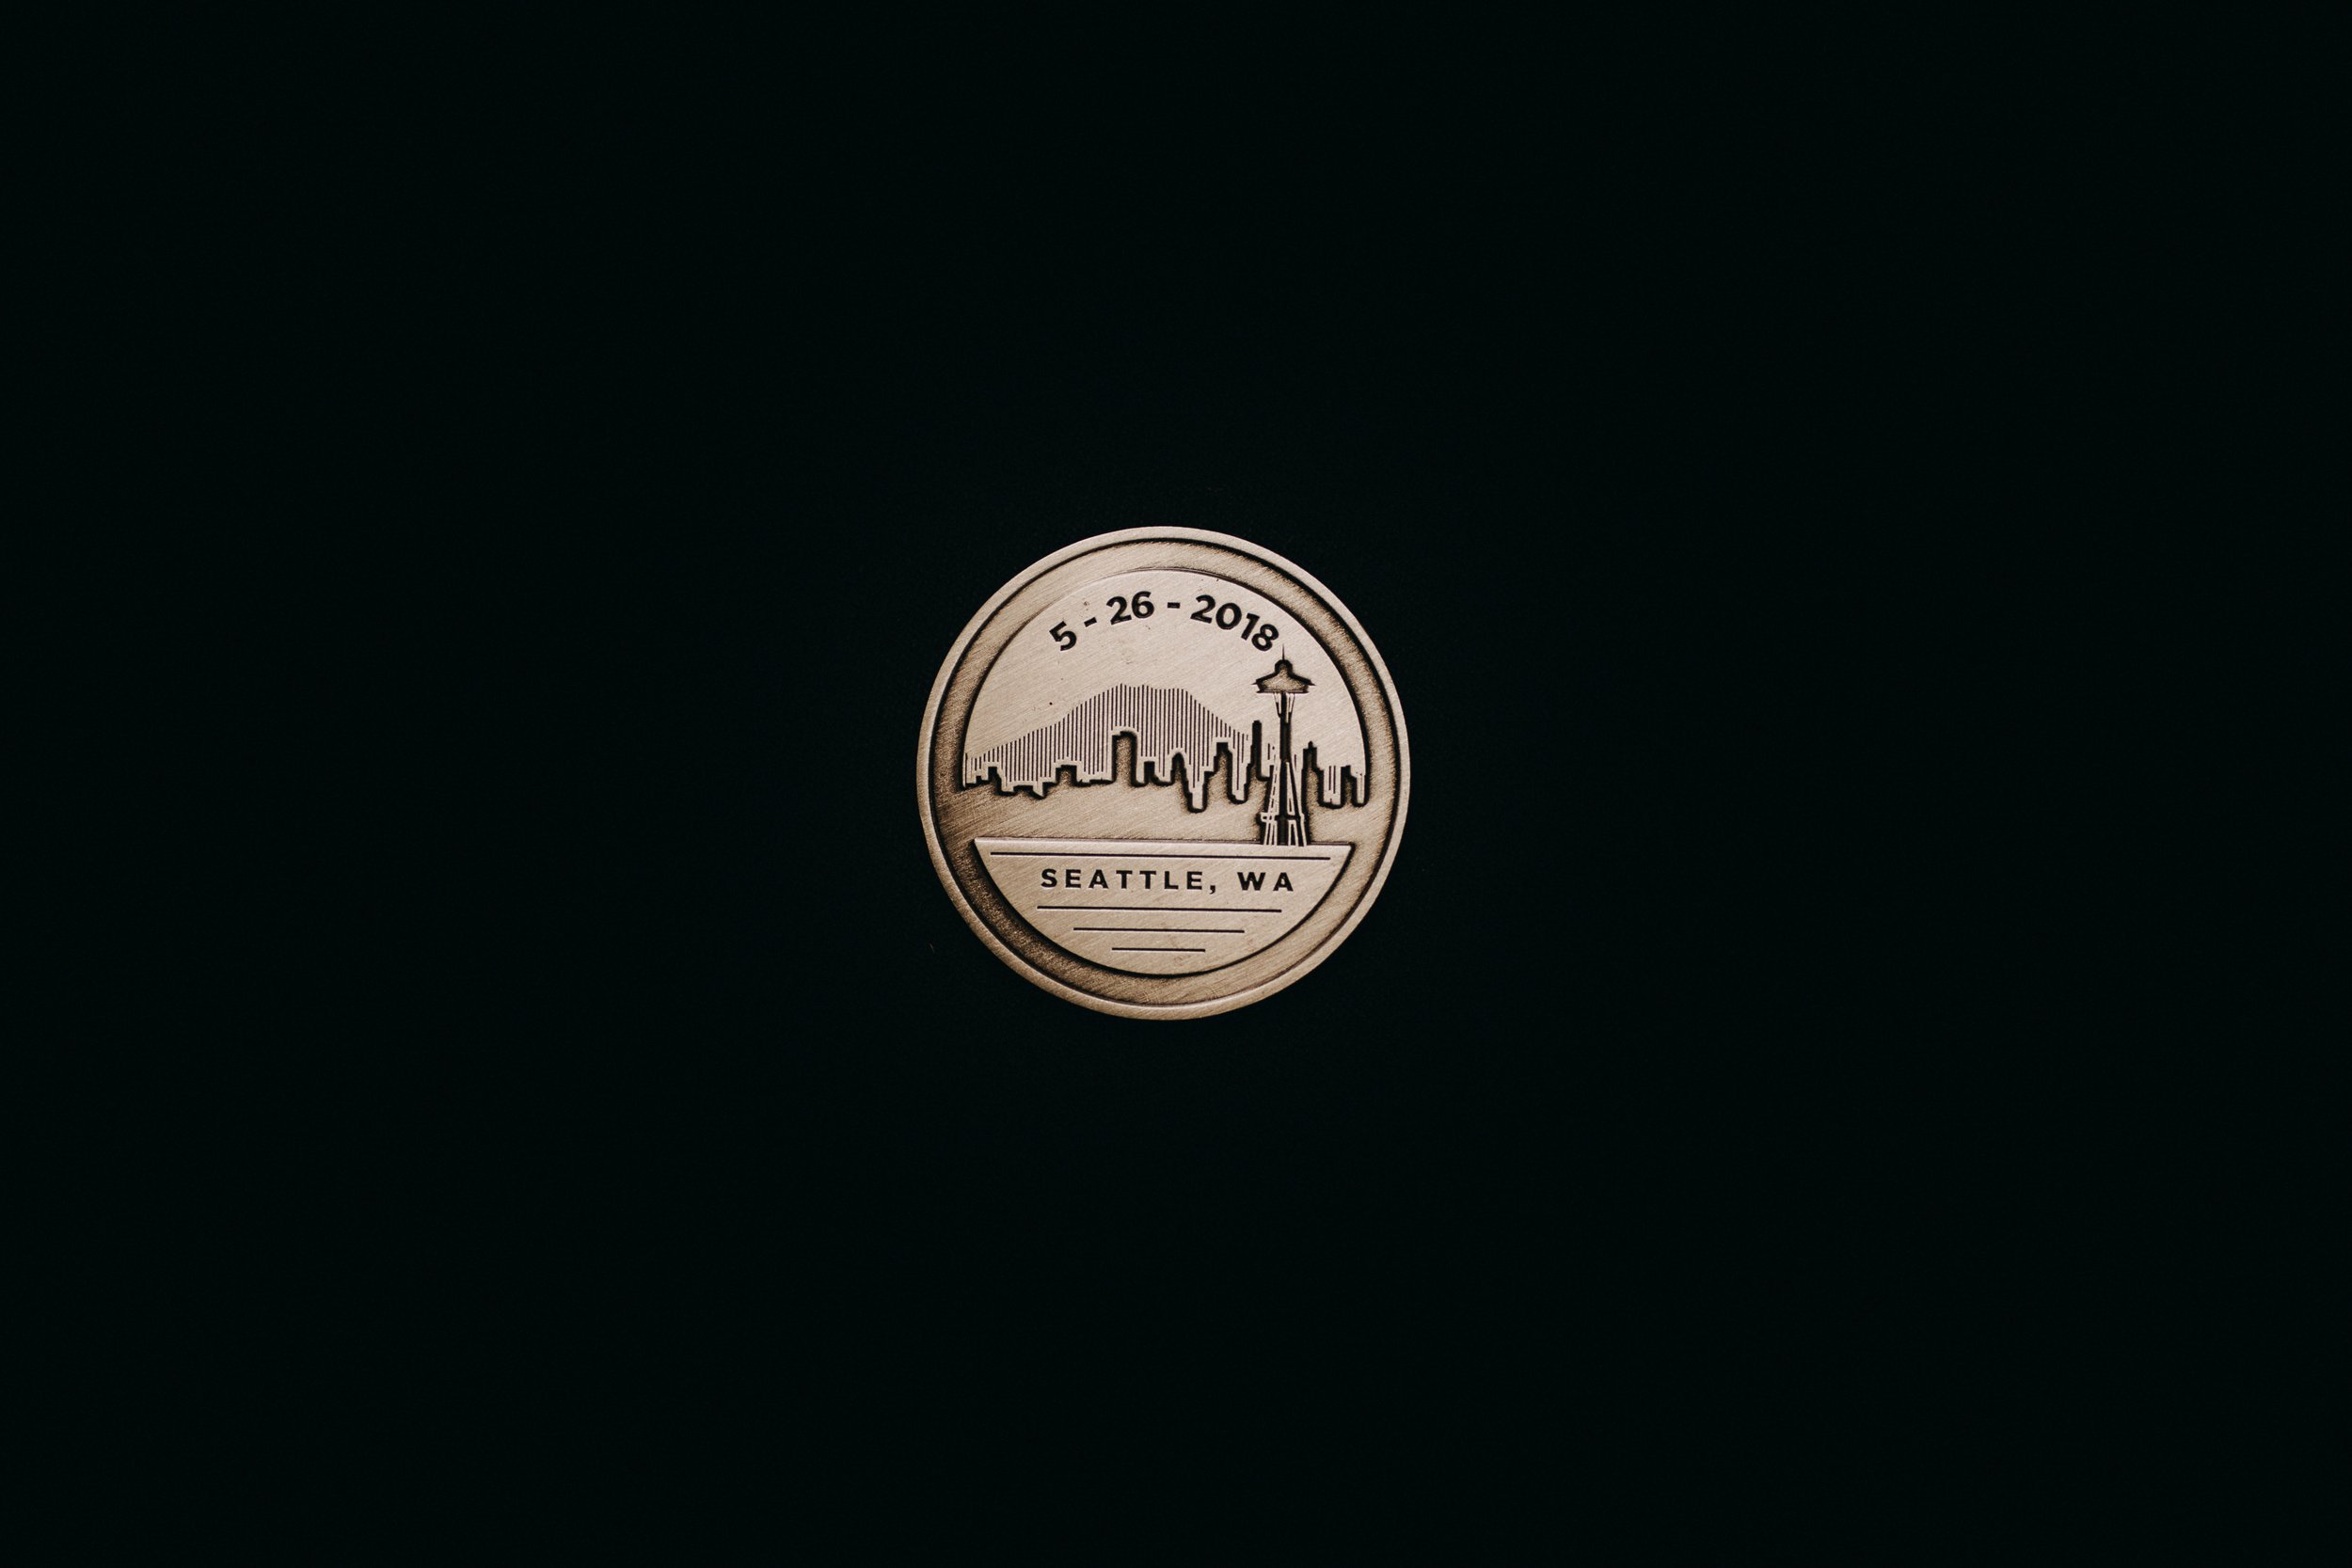  The back of the grooms’ custom medallion. There is imagery of the Seattle skyline with mountains and it reads “5-26-2018 Seattle, WA” 